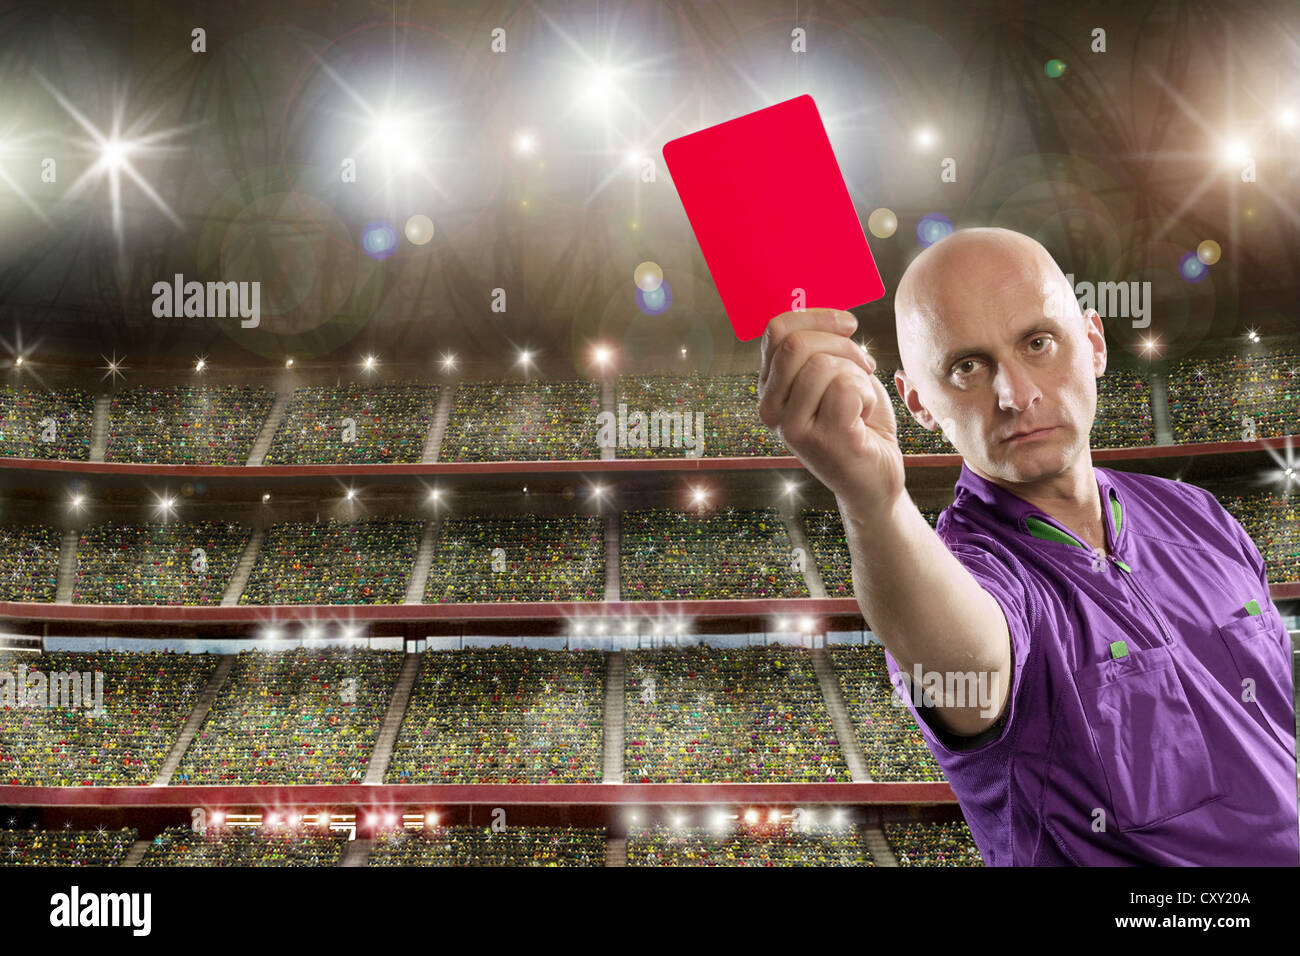 Referee holding a red card Stock Photo